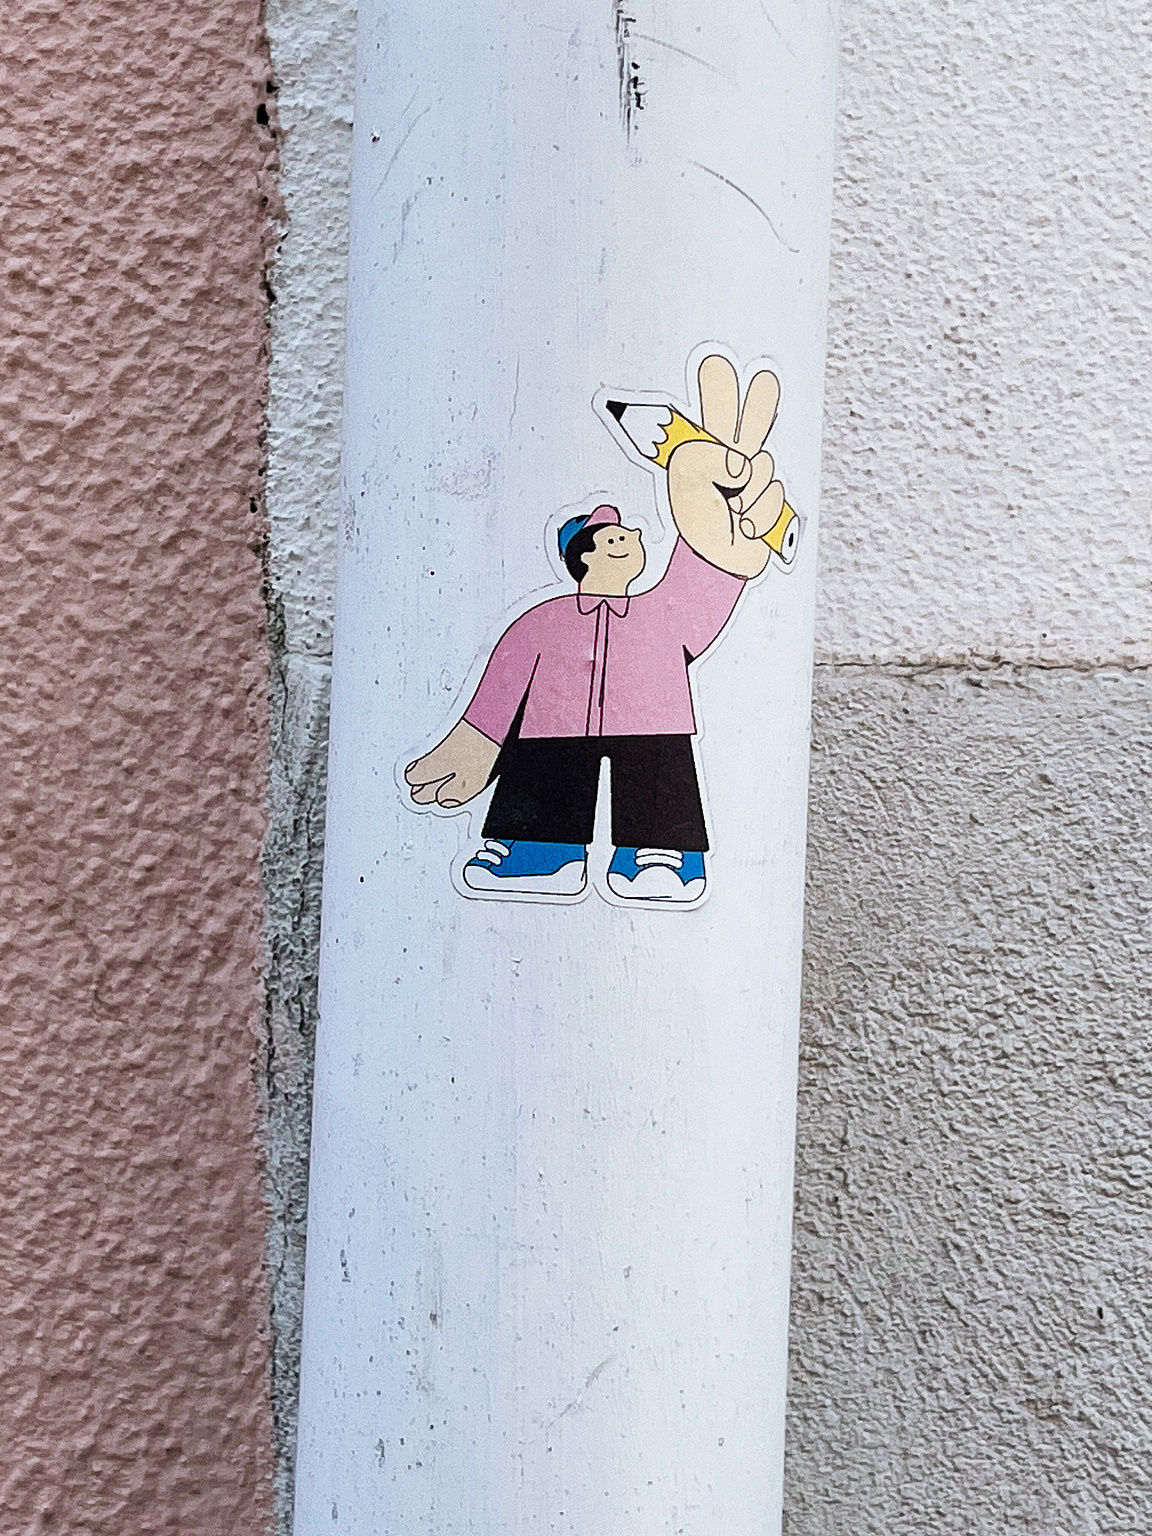 A sticker depicting a cartoon character making a peace sign, and holding a pencil, affixed to a white vertical street pipe against a pink wall.